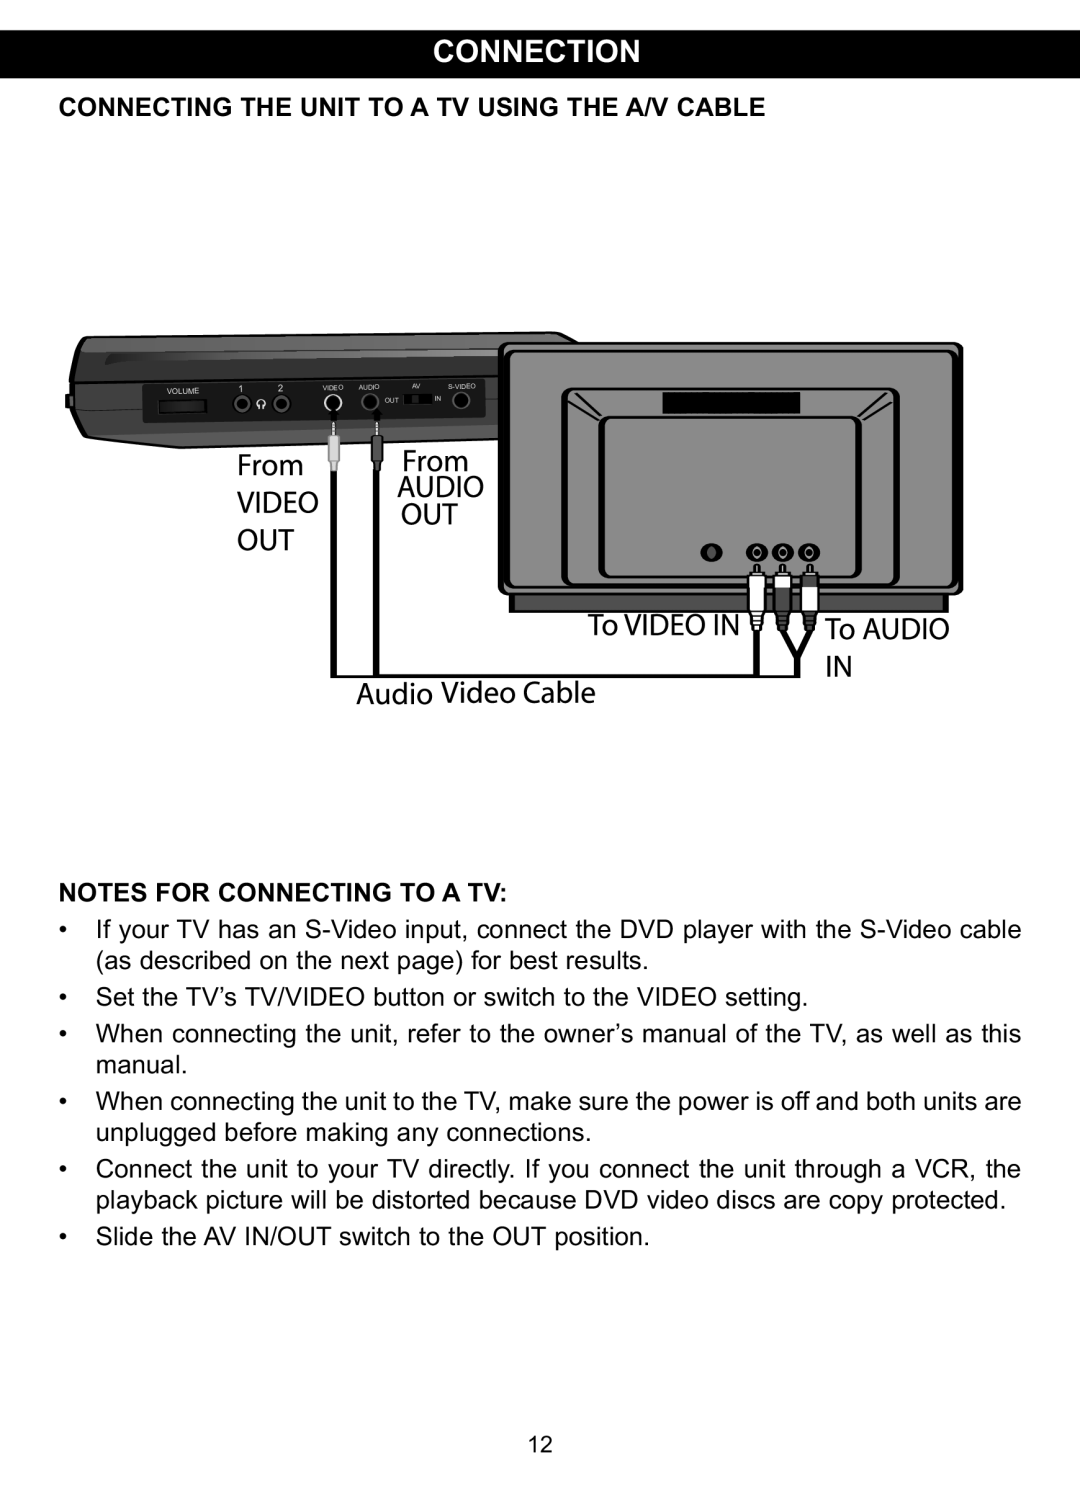 Memorex MVDP1088 manual Connection, Connecting The Unit To A Tv Using The A/V Cable, Notes For Connecting To A Tv 